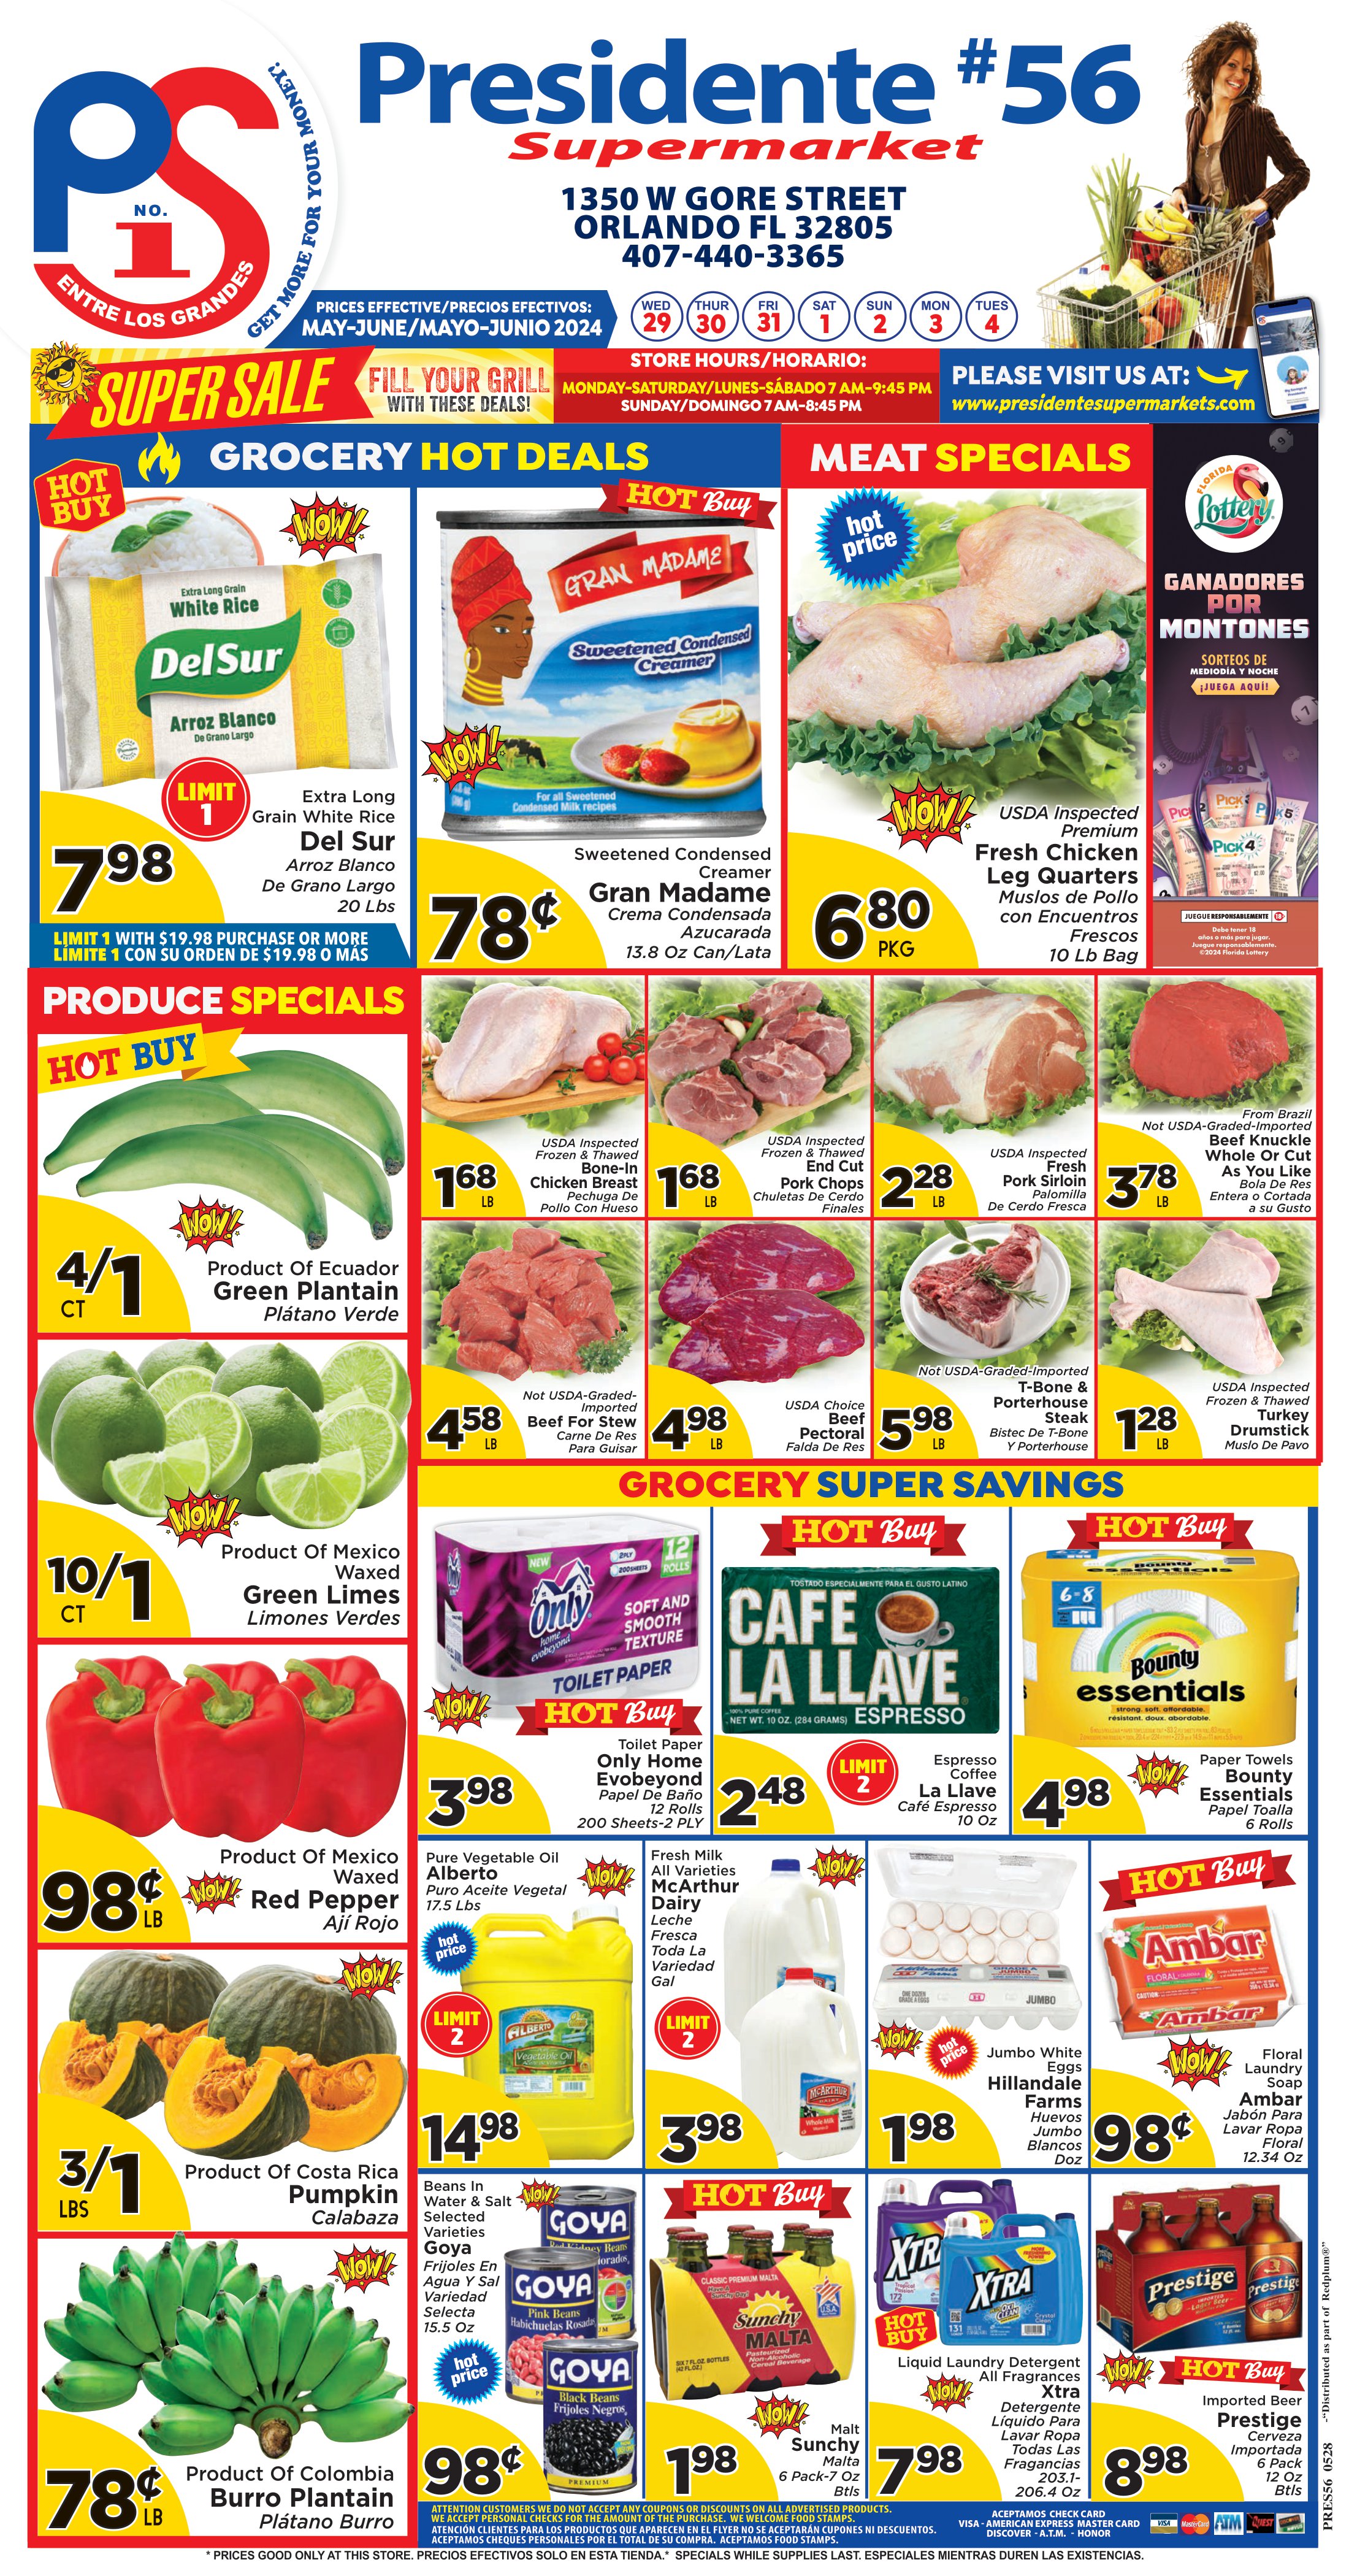 Presidente Supermarket - Weekly Promo for Store 56 - Page 1